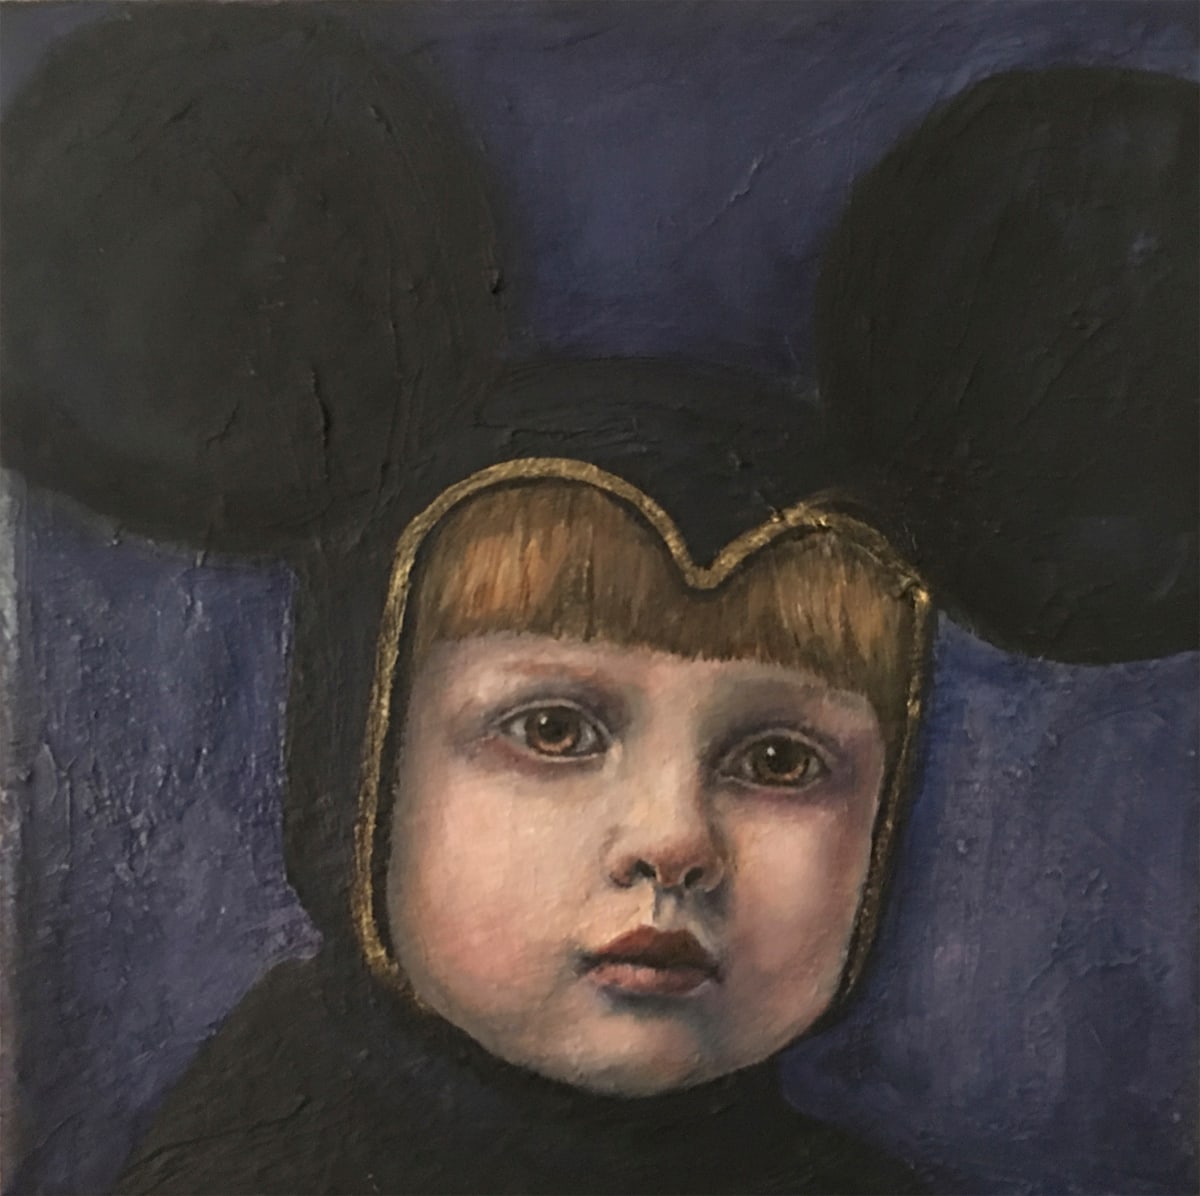 The Little Mouse by Susan Silvester  Image: A young girl's solemn gaze pierces through the whimsy of her black Mouse hat, a poignant juxtaposition of innocence and mystery.